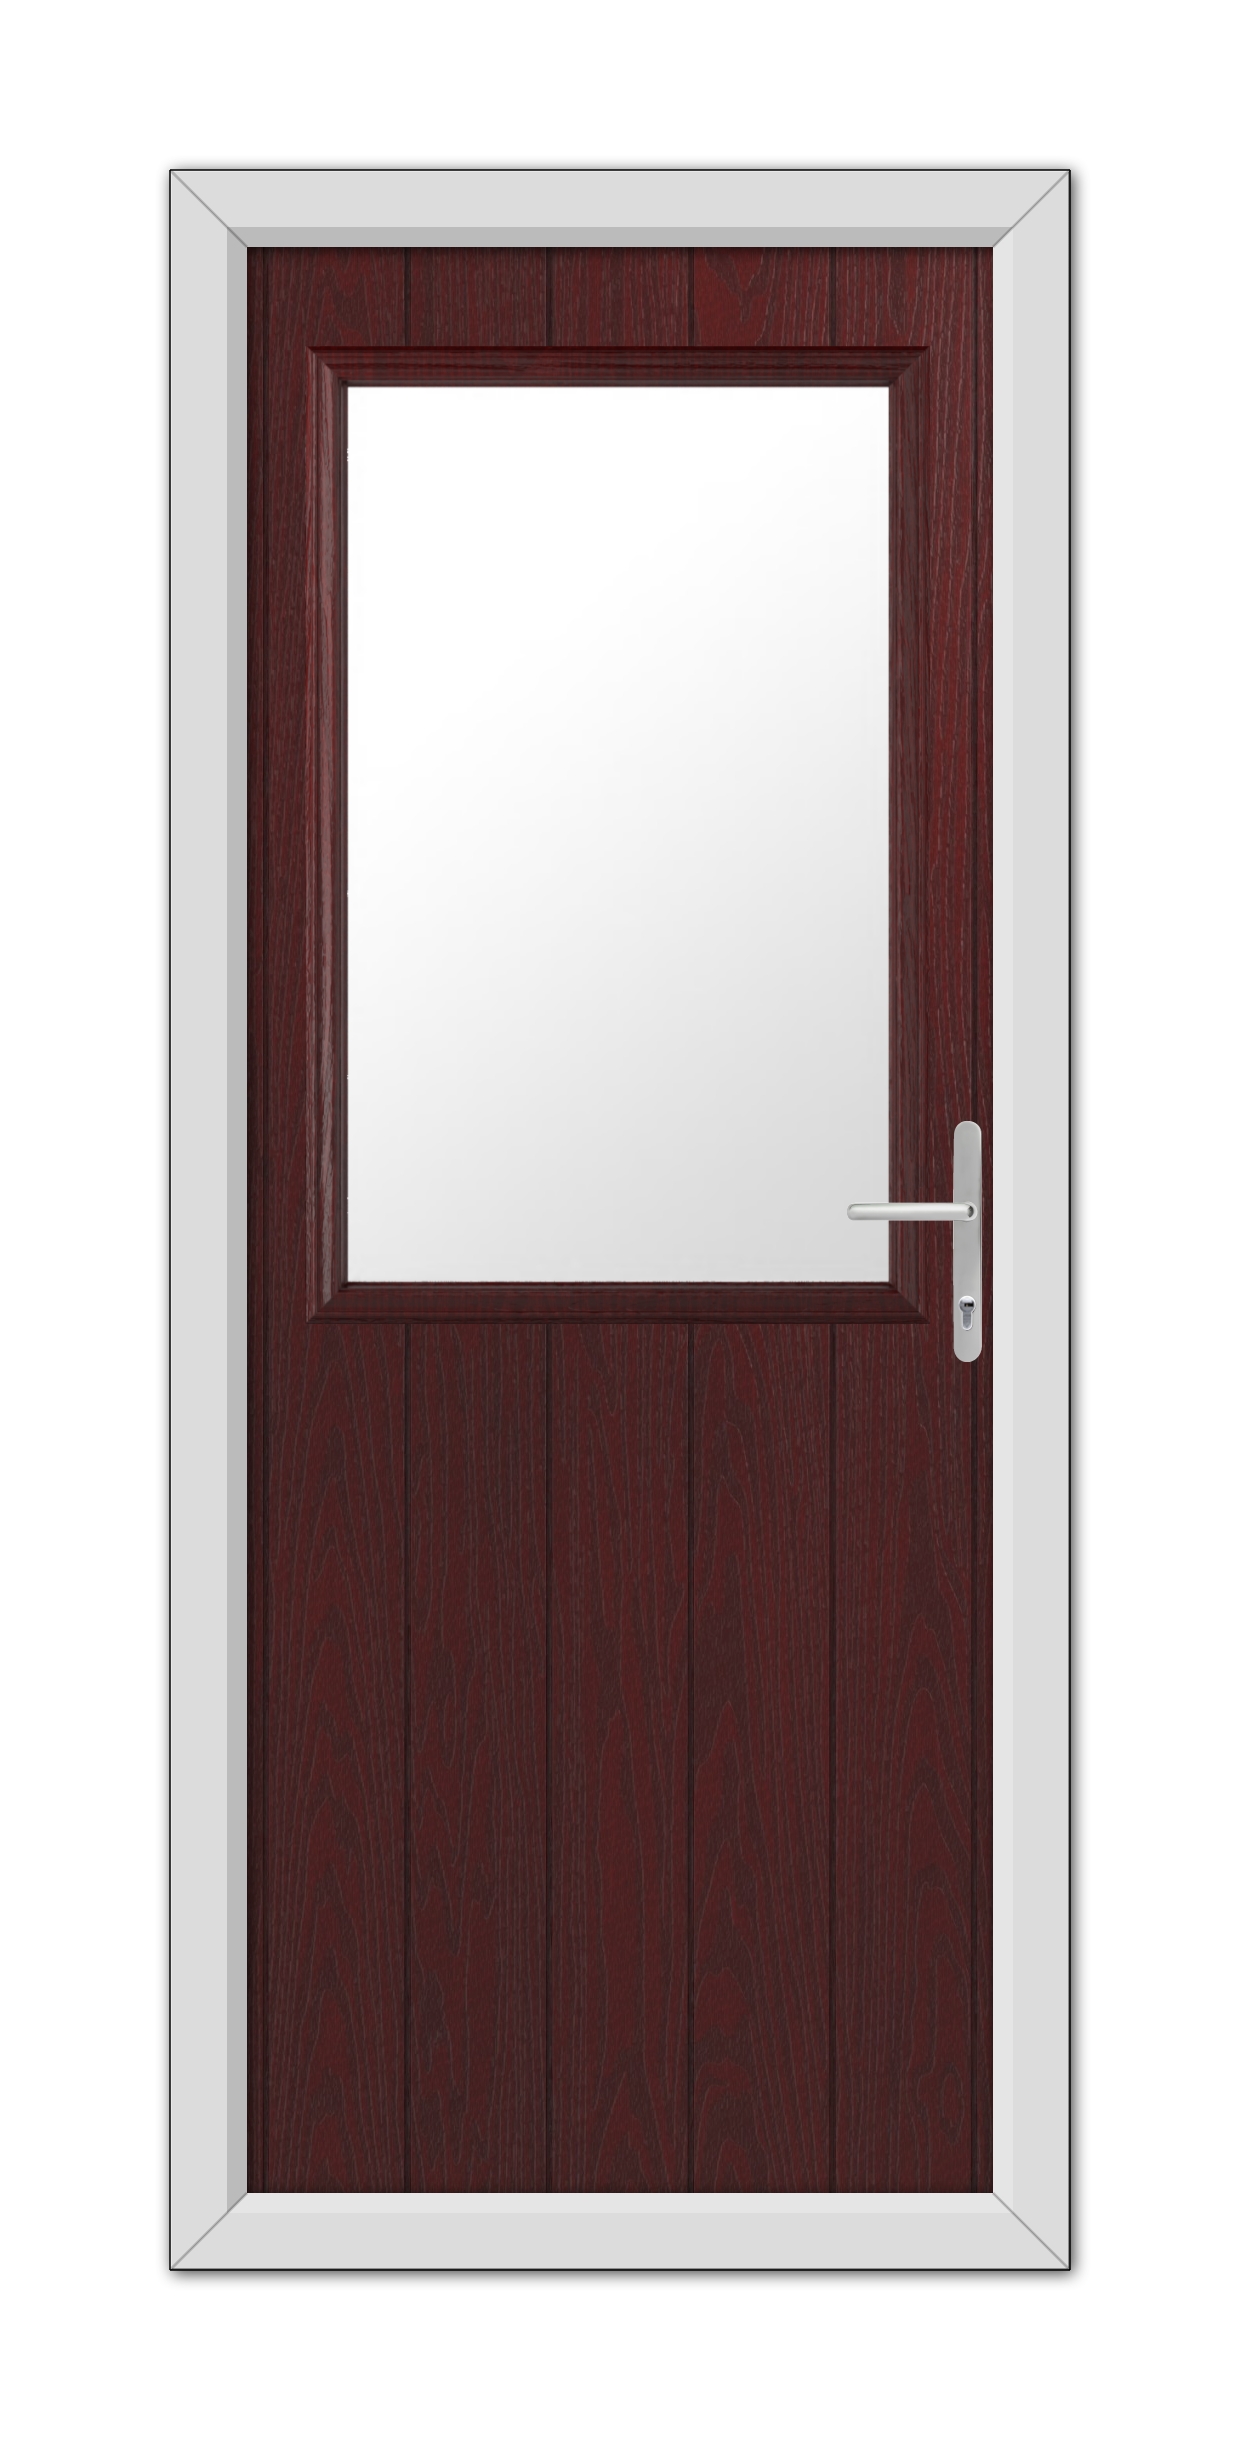 A modern Rosewood Clifton Composite Door 48mm Timber Core with a large rectangular window, fitted with a white handle and framed in a light gray casing.